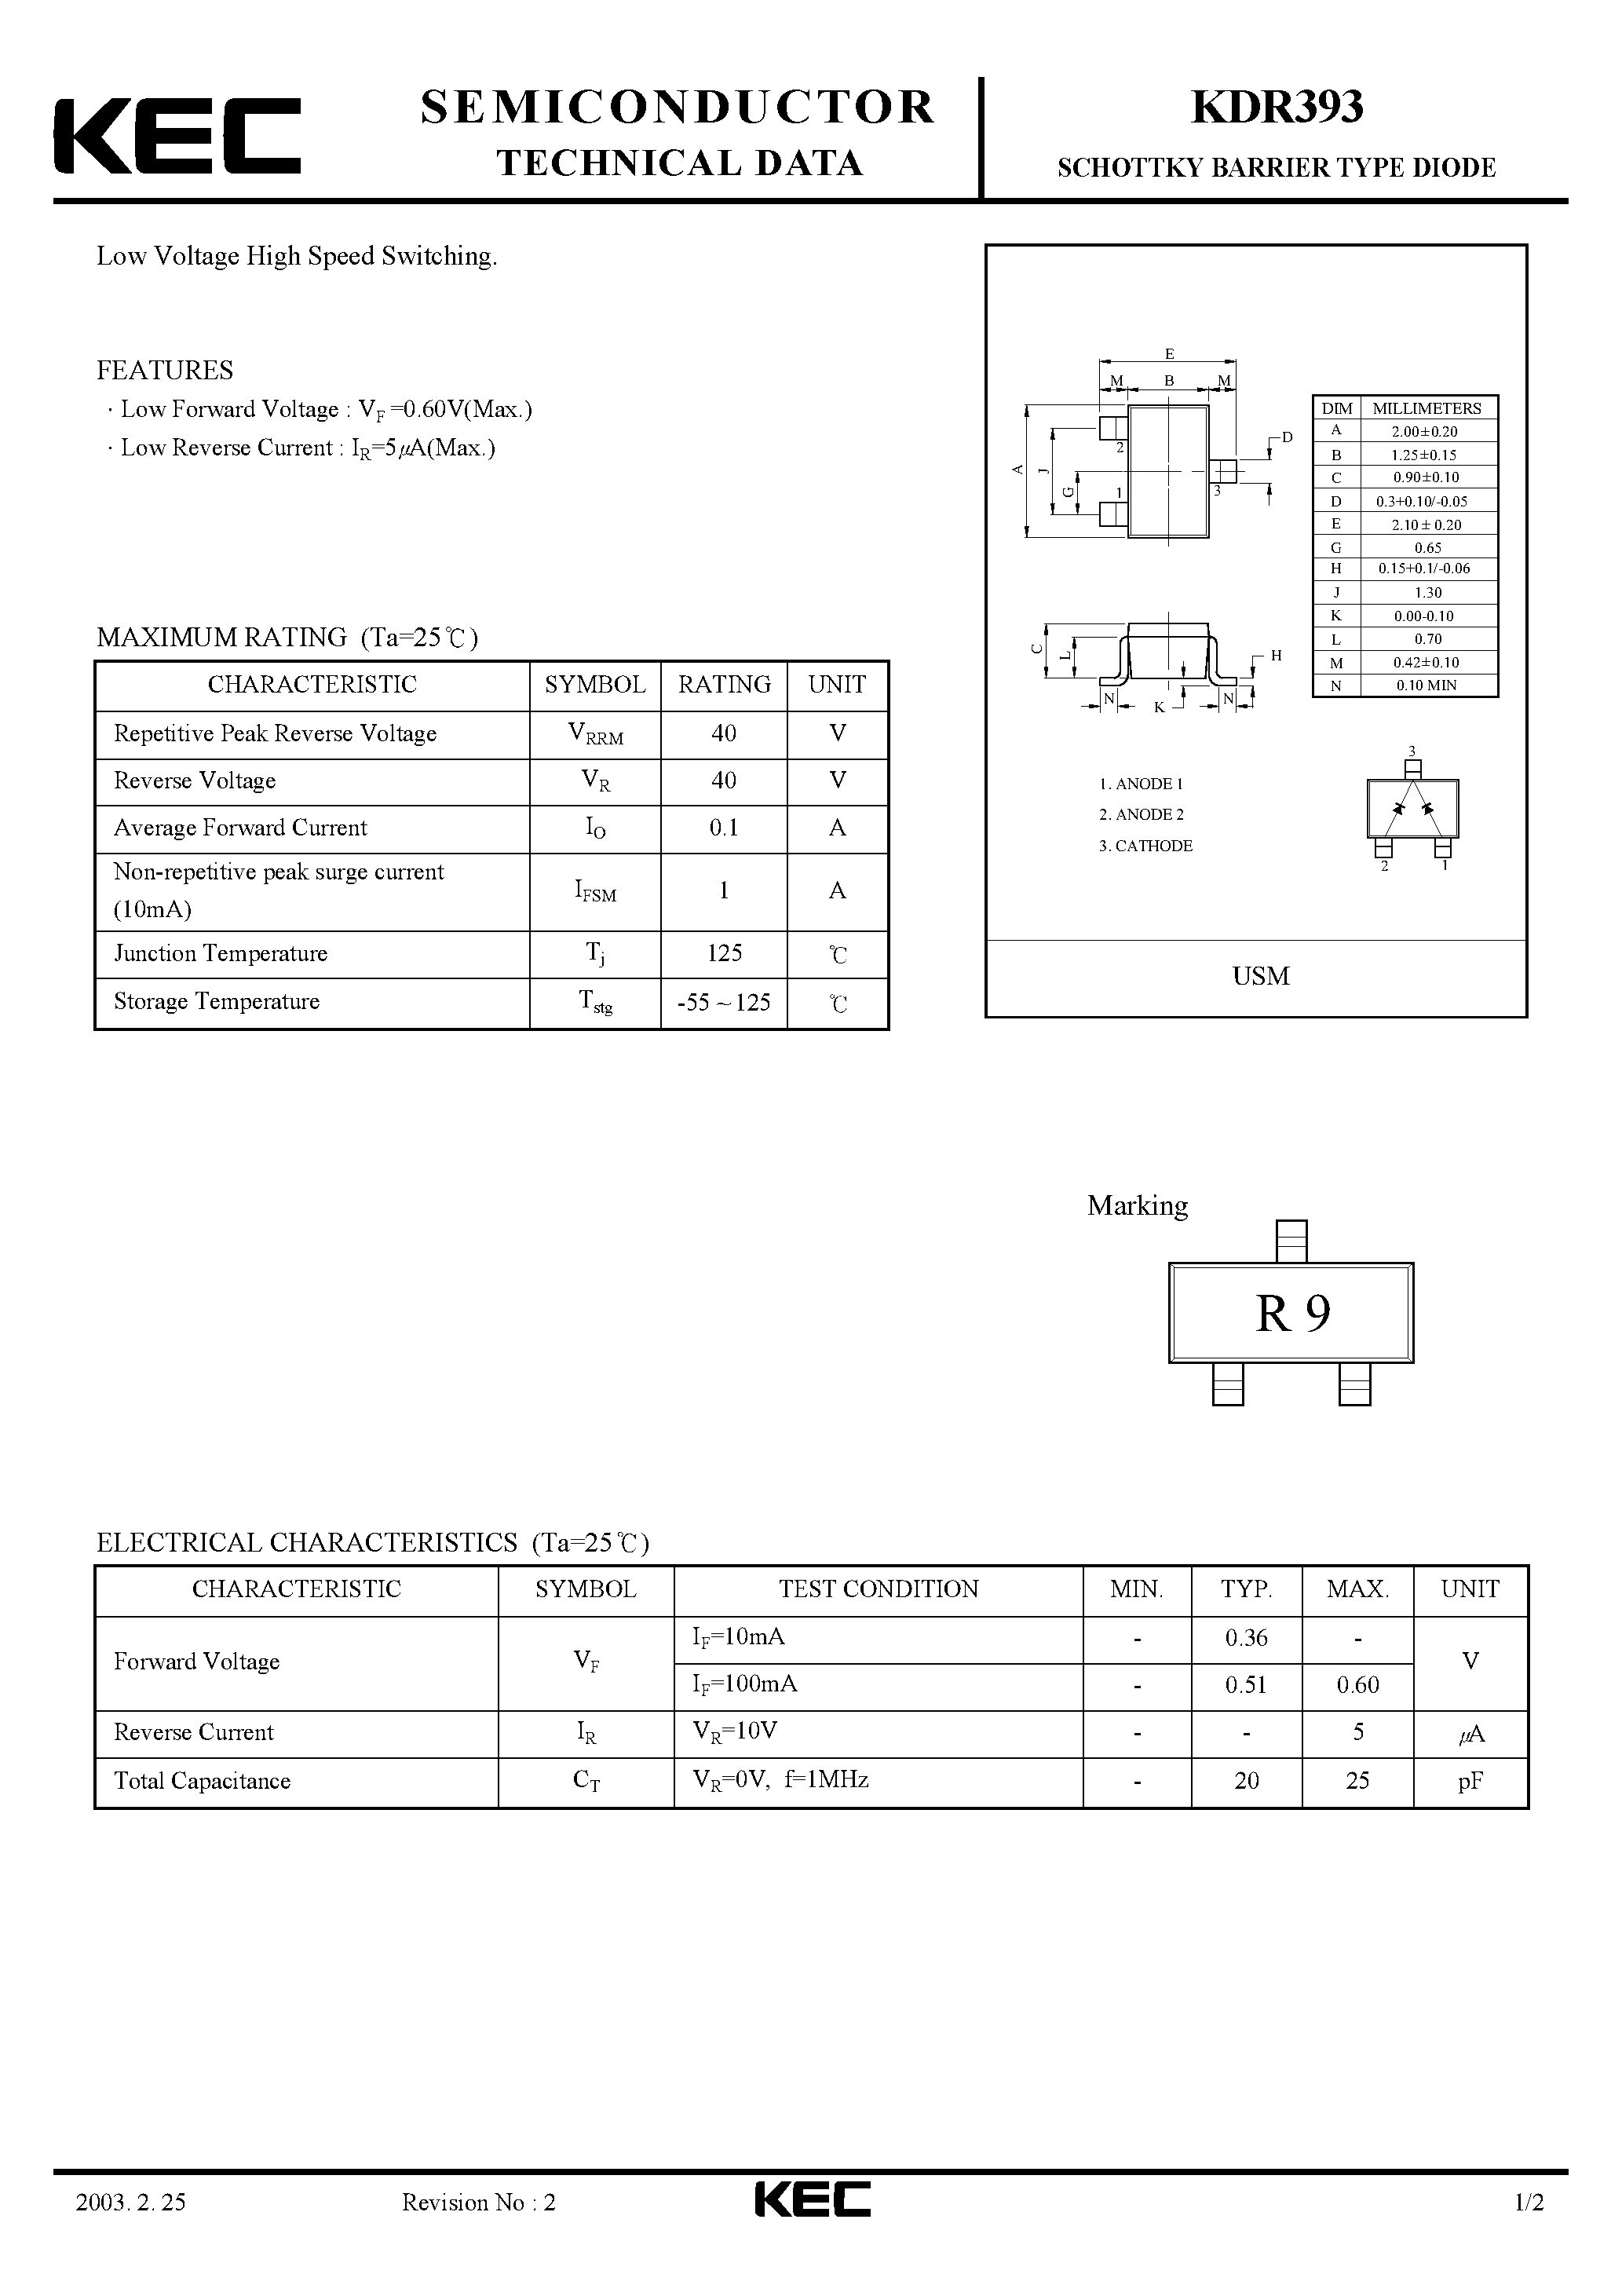 Datasheet KDR393 - SCHOTTKY BARRIER TYPE DIODE(LOW VOLTAGE HIGH SPEED SWITCHING) page 1